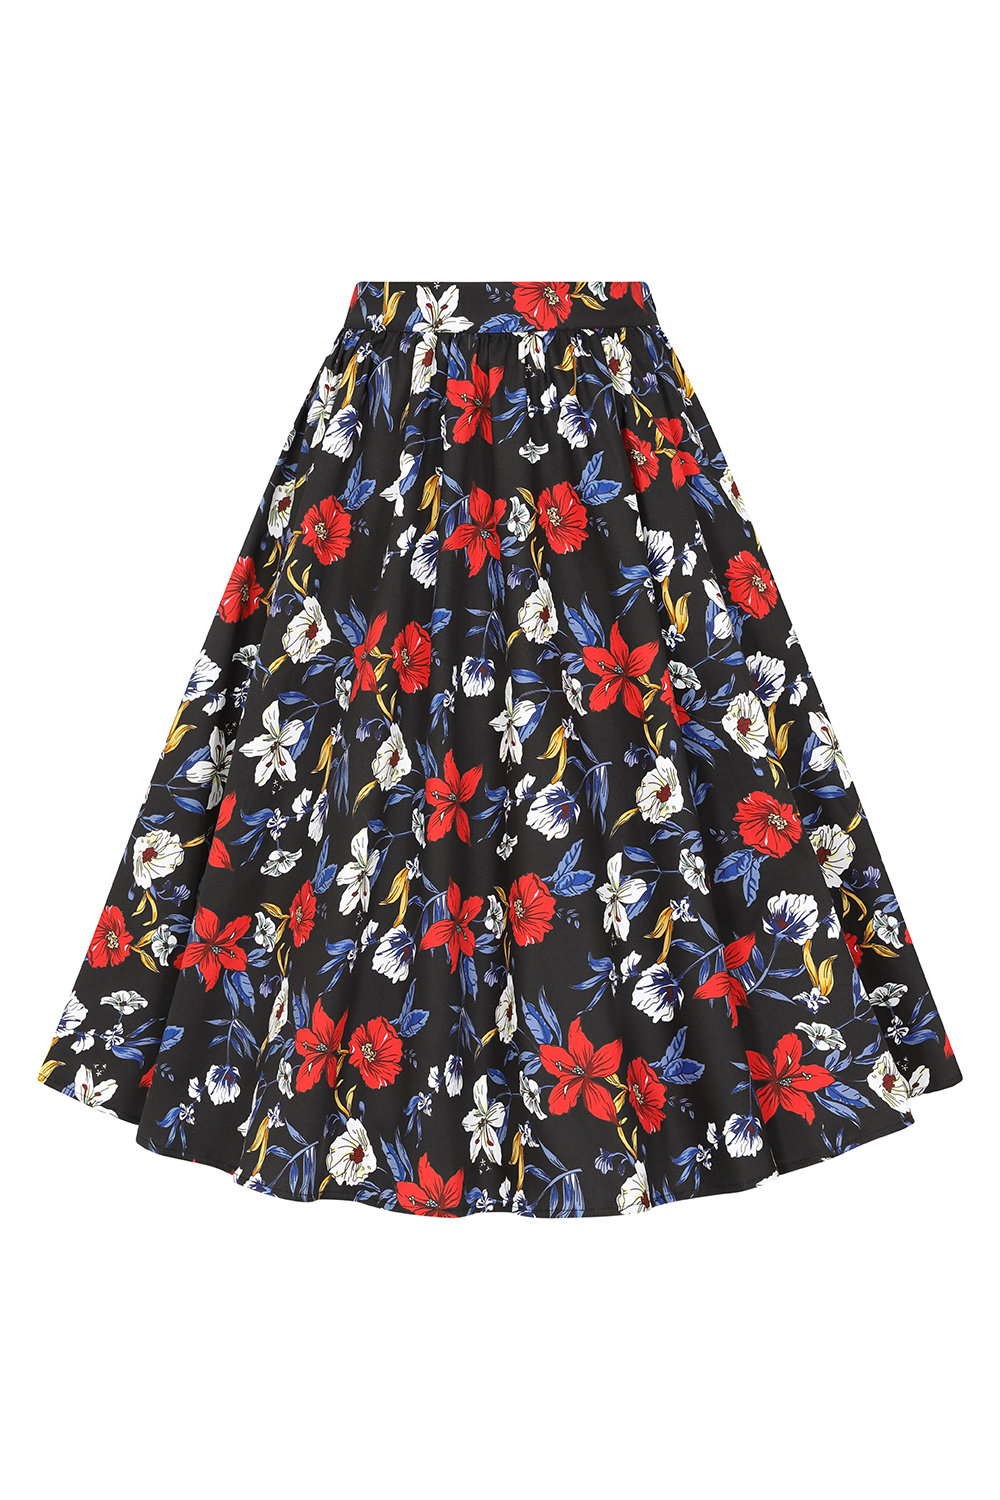 Milly Floral Swing Skirt in Black/Red - Hearts & Roses London